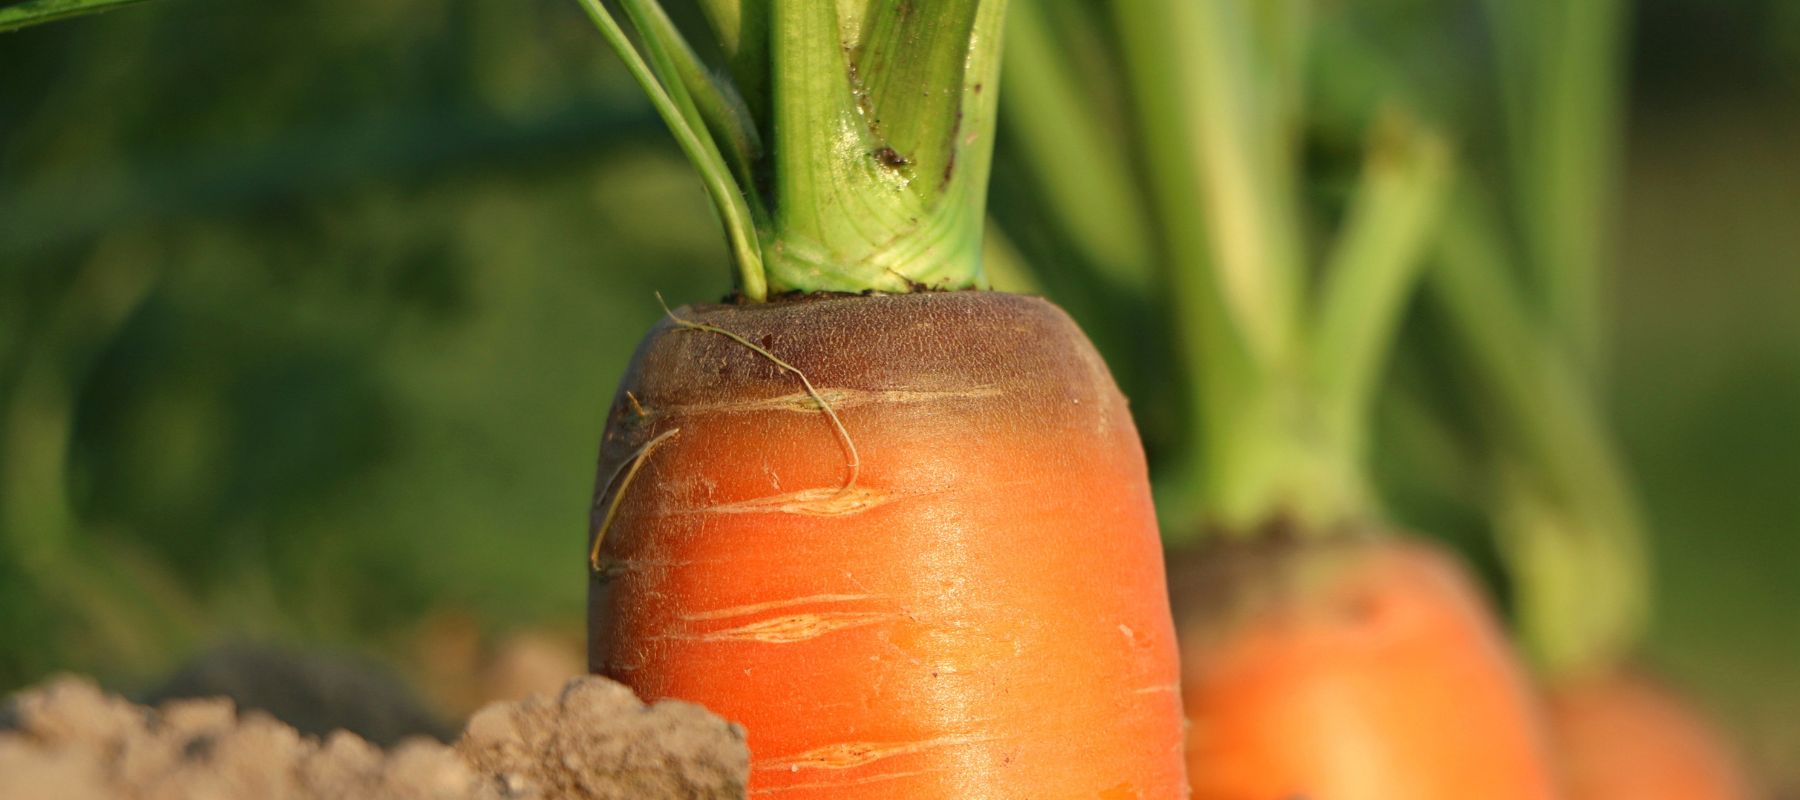 Growing carrots successfully